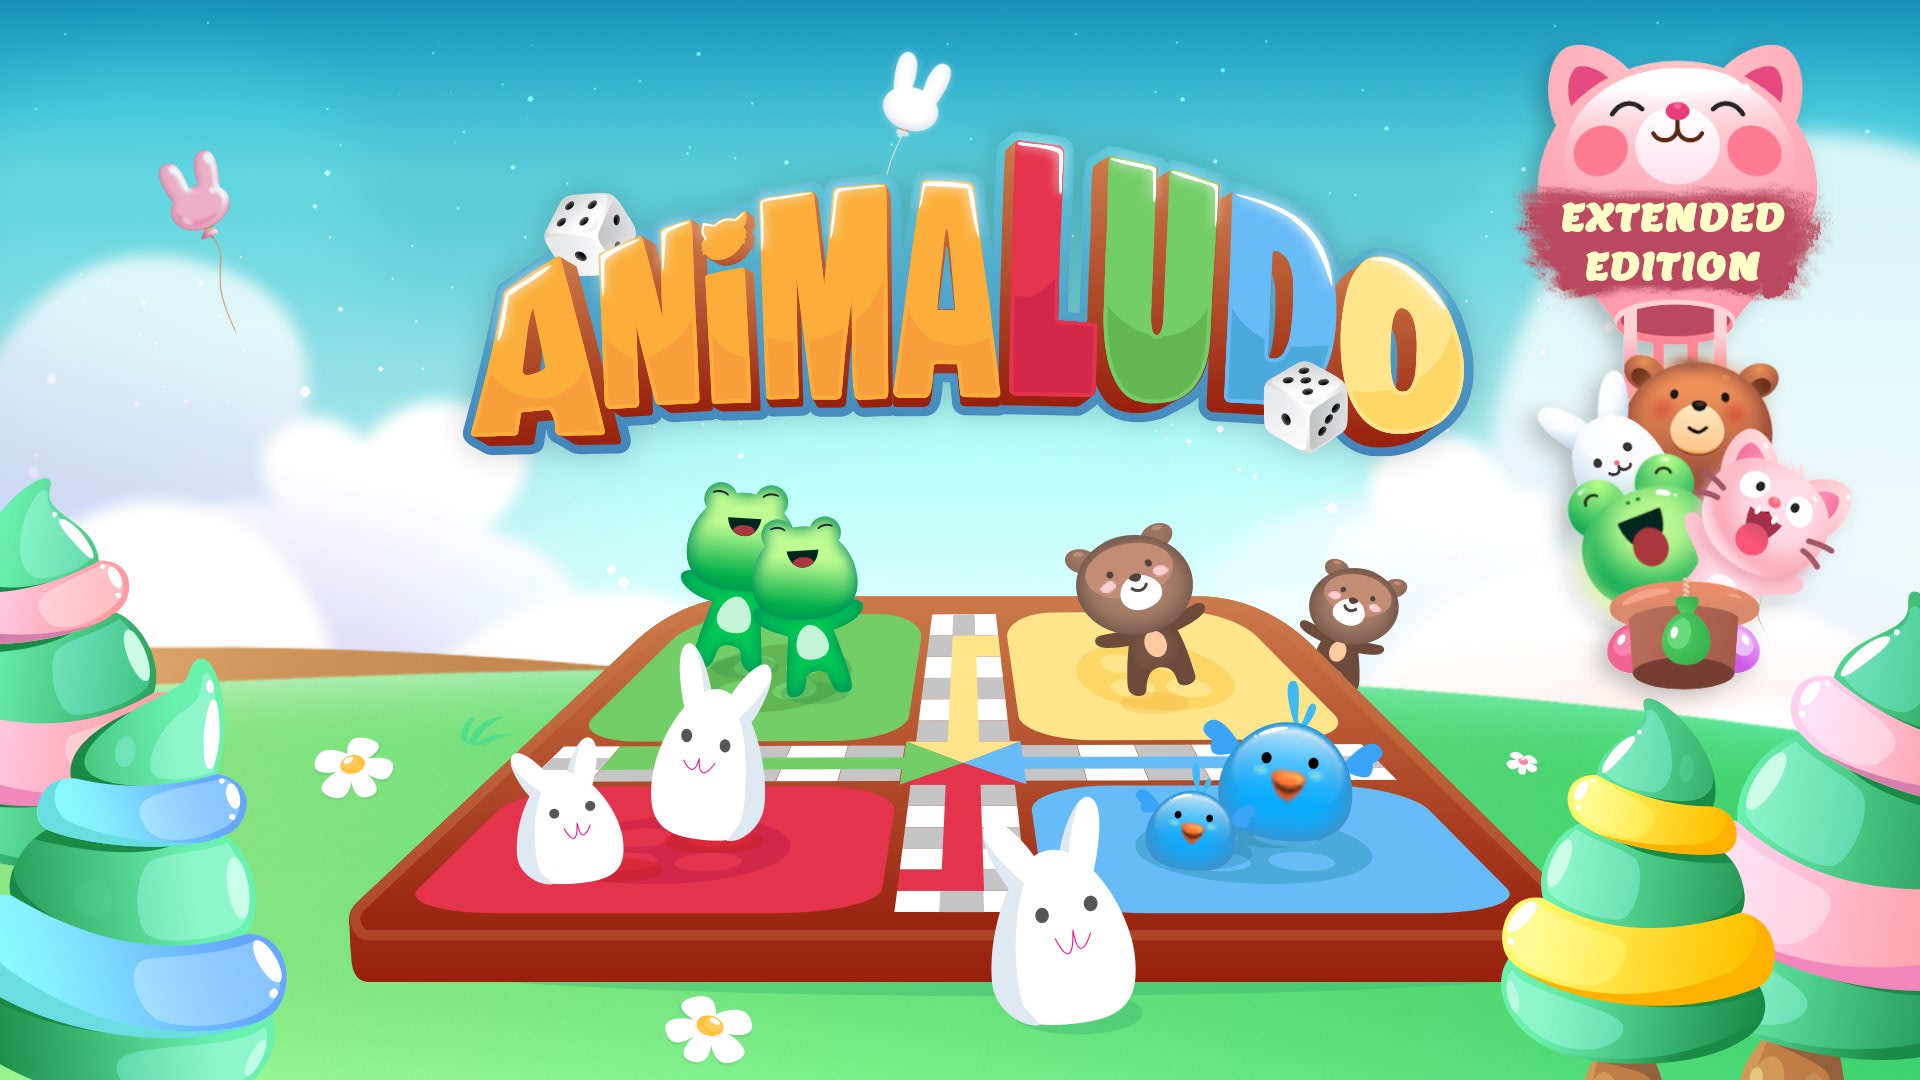 AnimaLudo Extended Edition